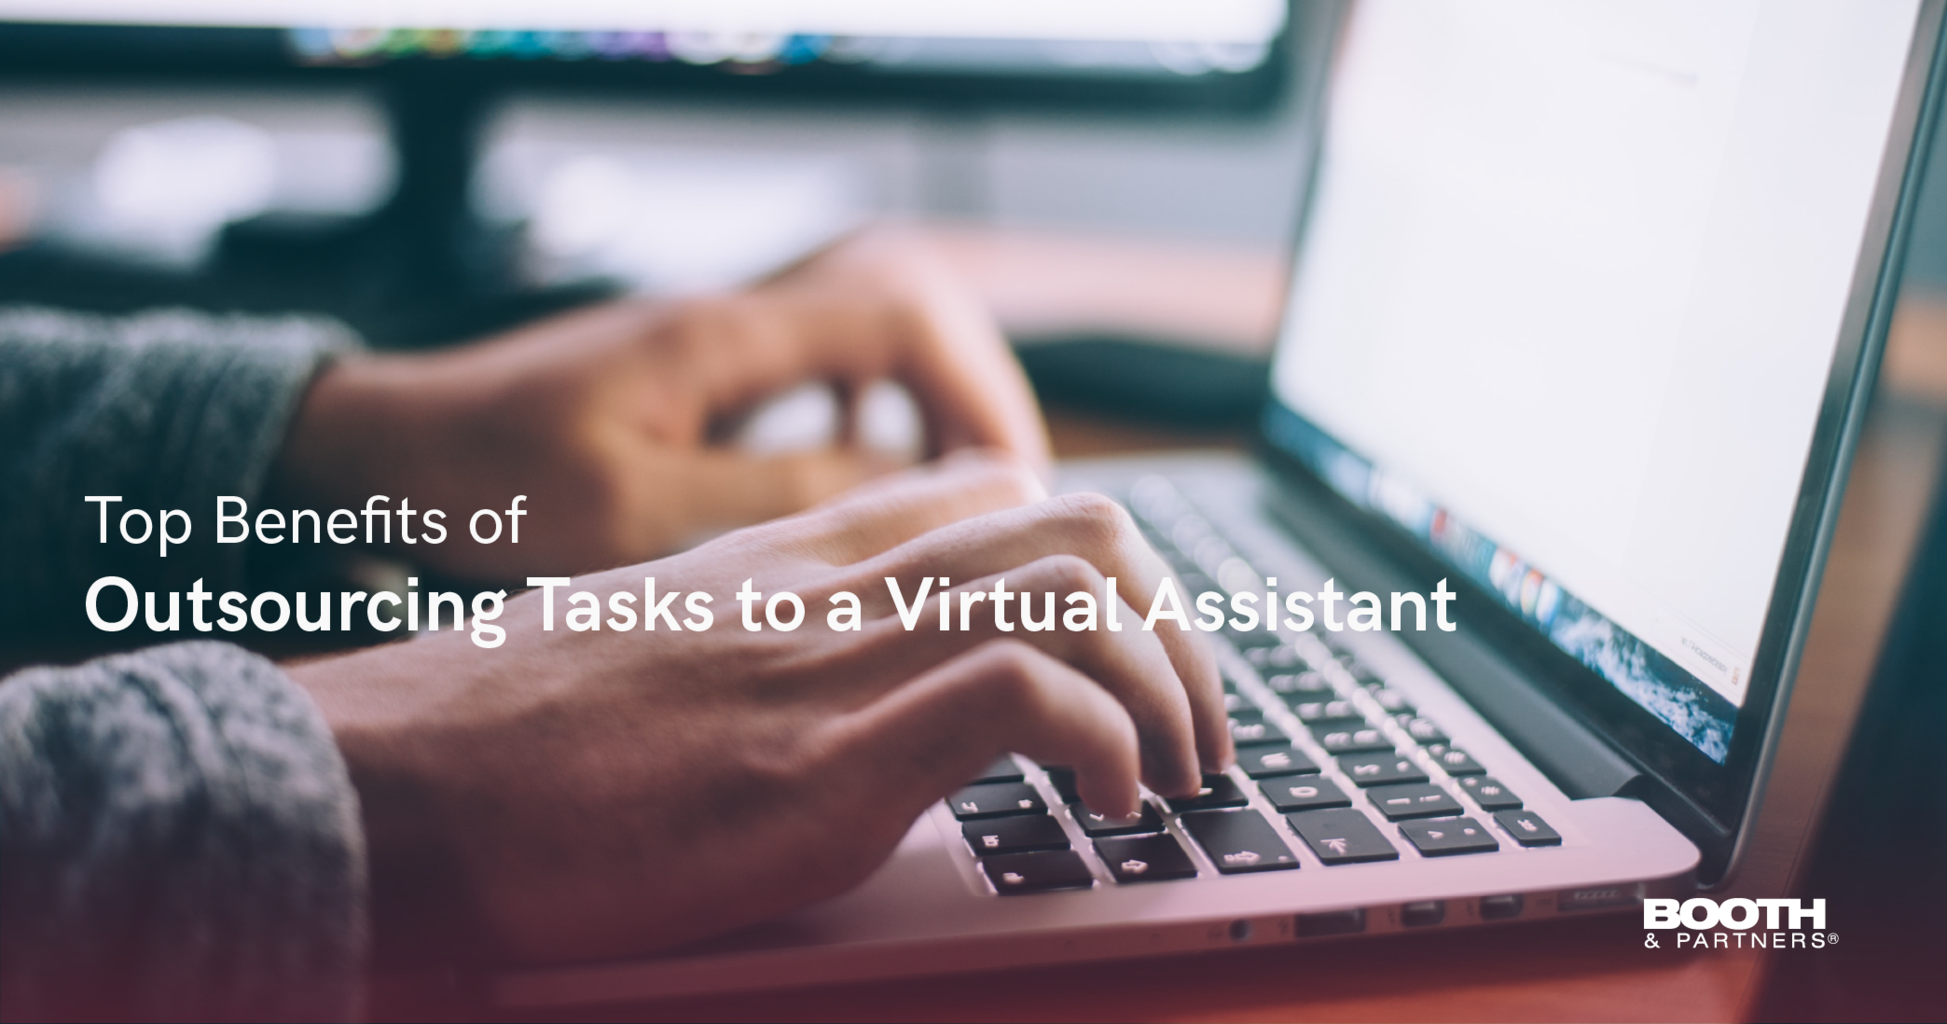 Top Benefits of Outsourcing Tasks to a Virtual Assistant